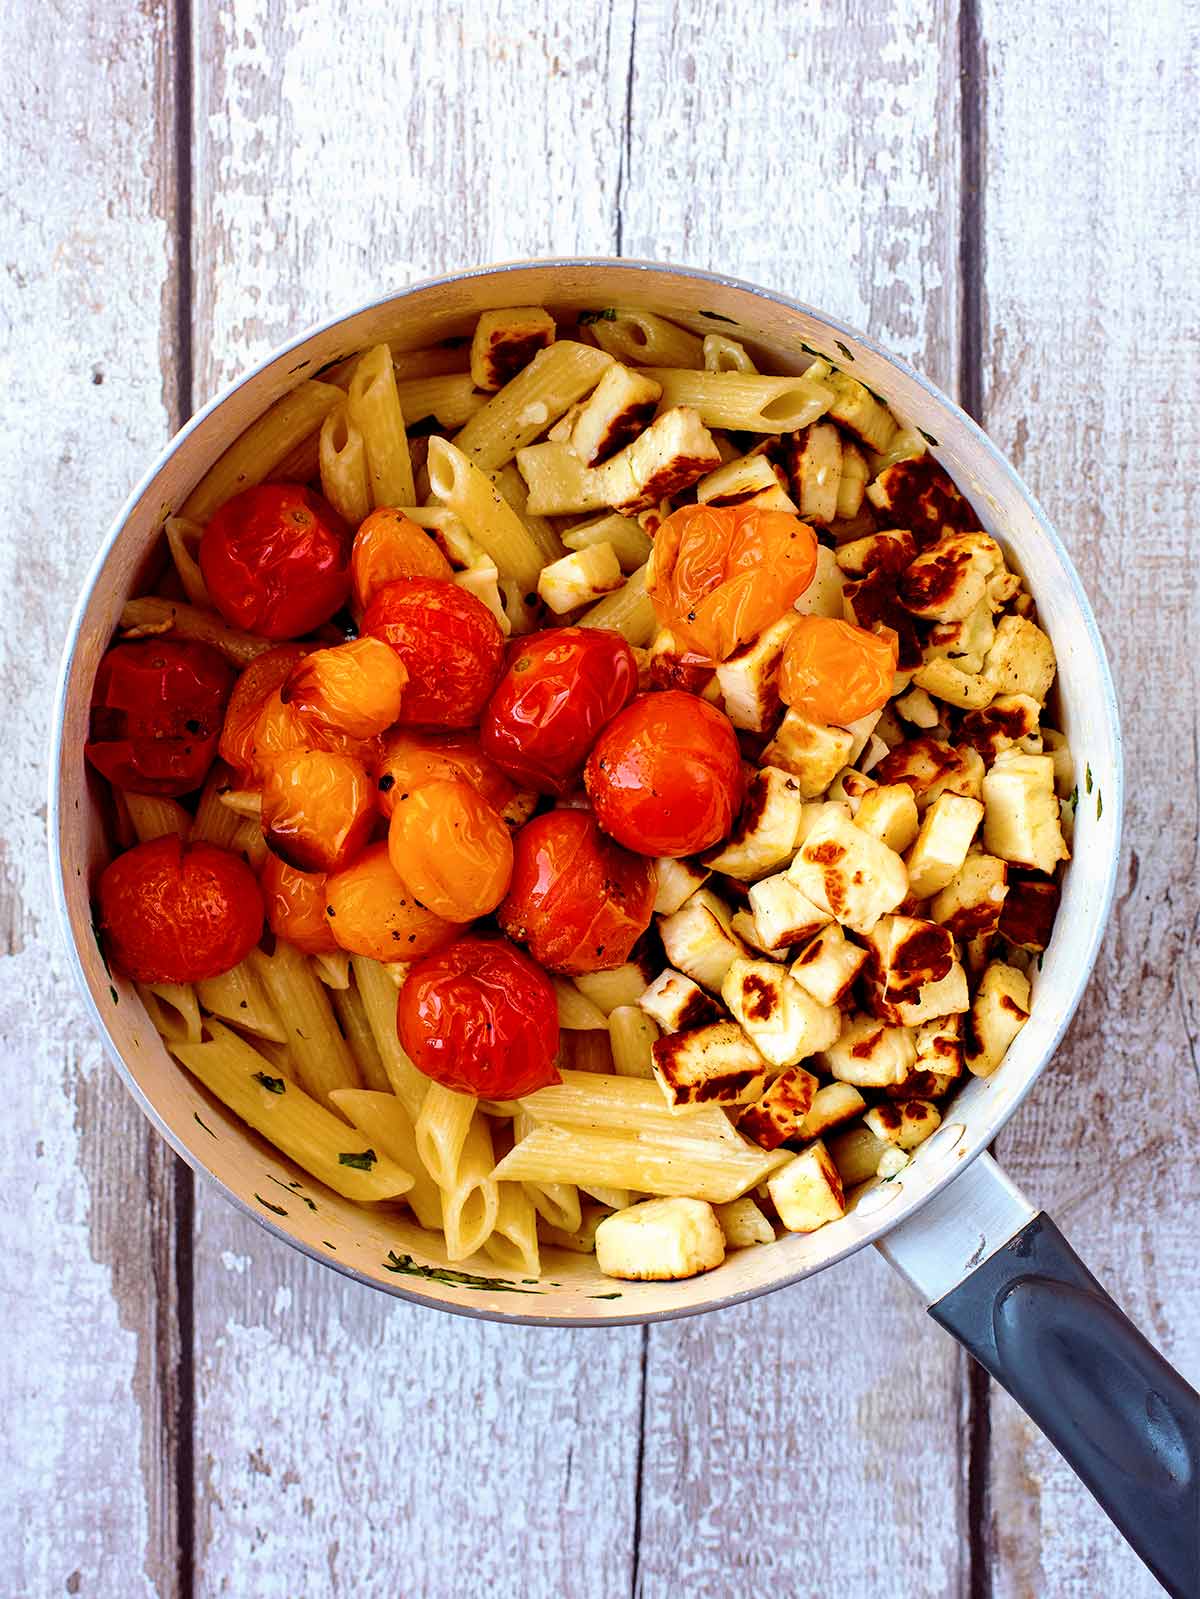 A saucepan filled with creamy penne pasta, cherry tomatoes and cooked cubes of halloumi.